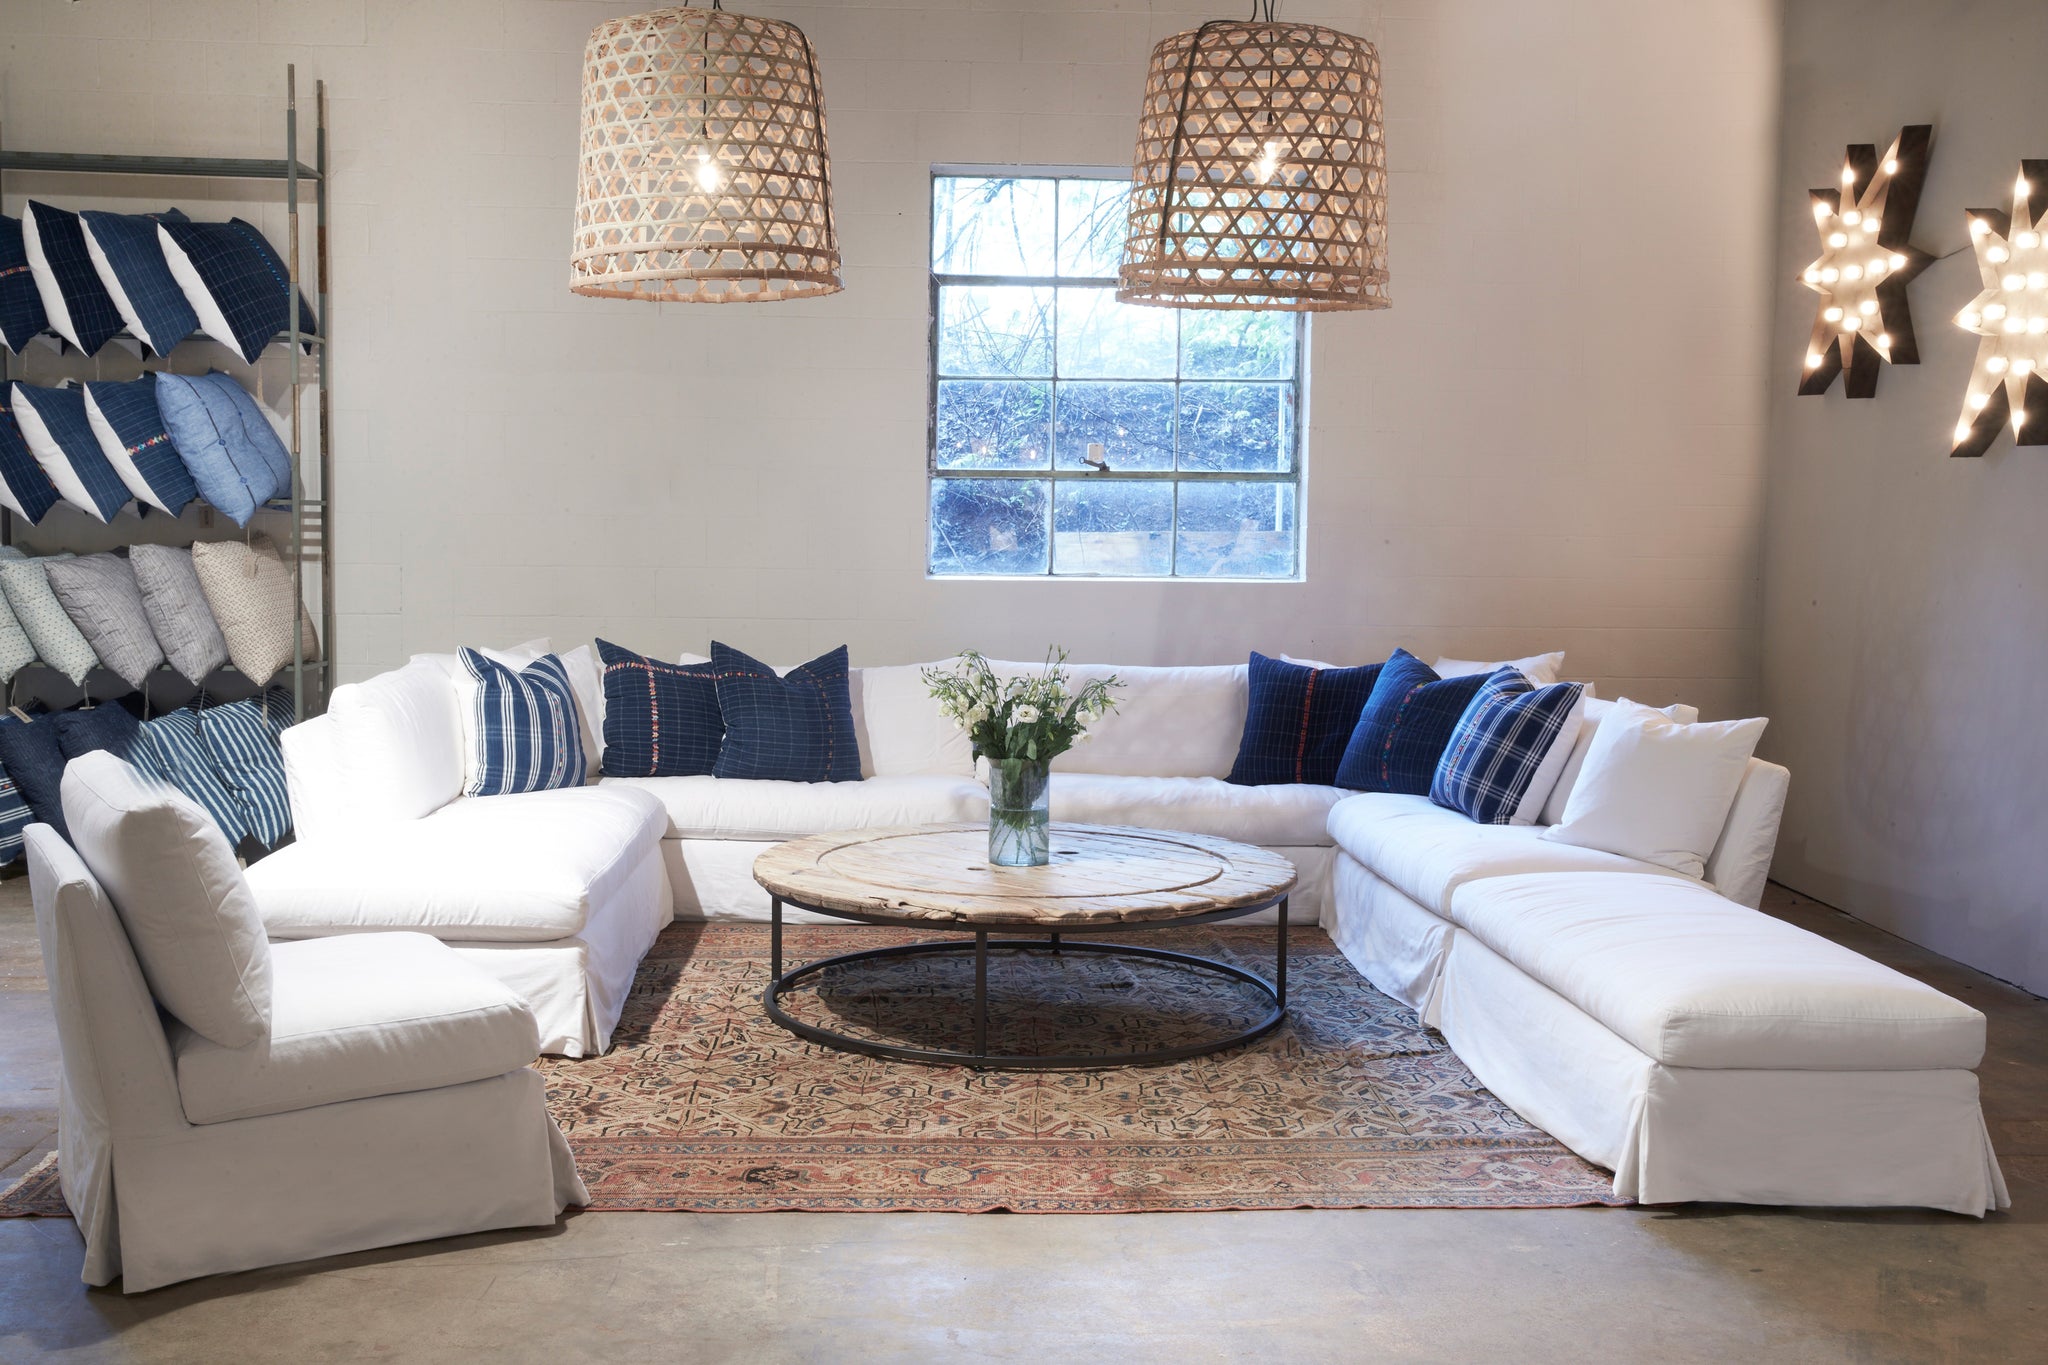  Seda bench in Denim White next to a large white sofa and chair. In the center is a wood coffee table. Above all the pieces hangs two chandeliers. You can also see multiple pillows on a rack in the background. Photographed in Denim White. 